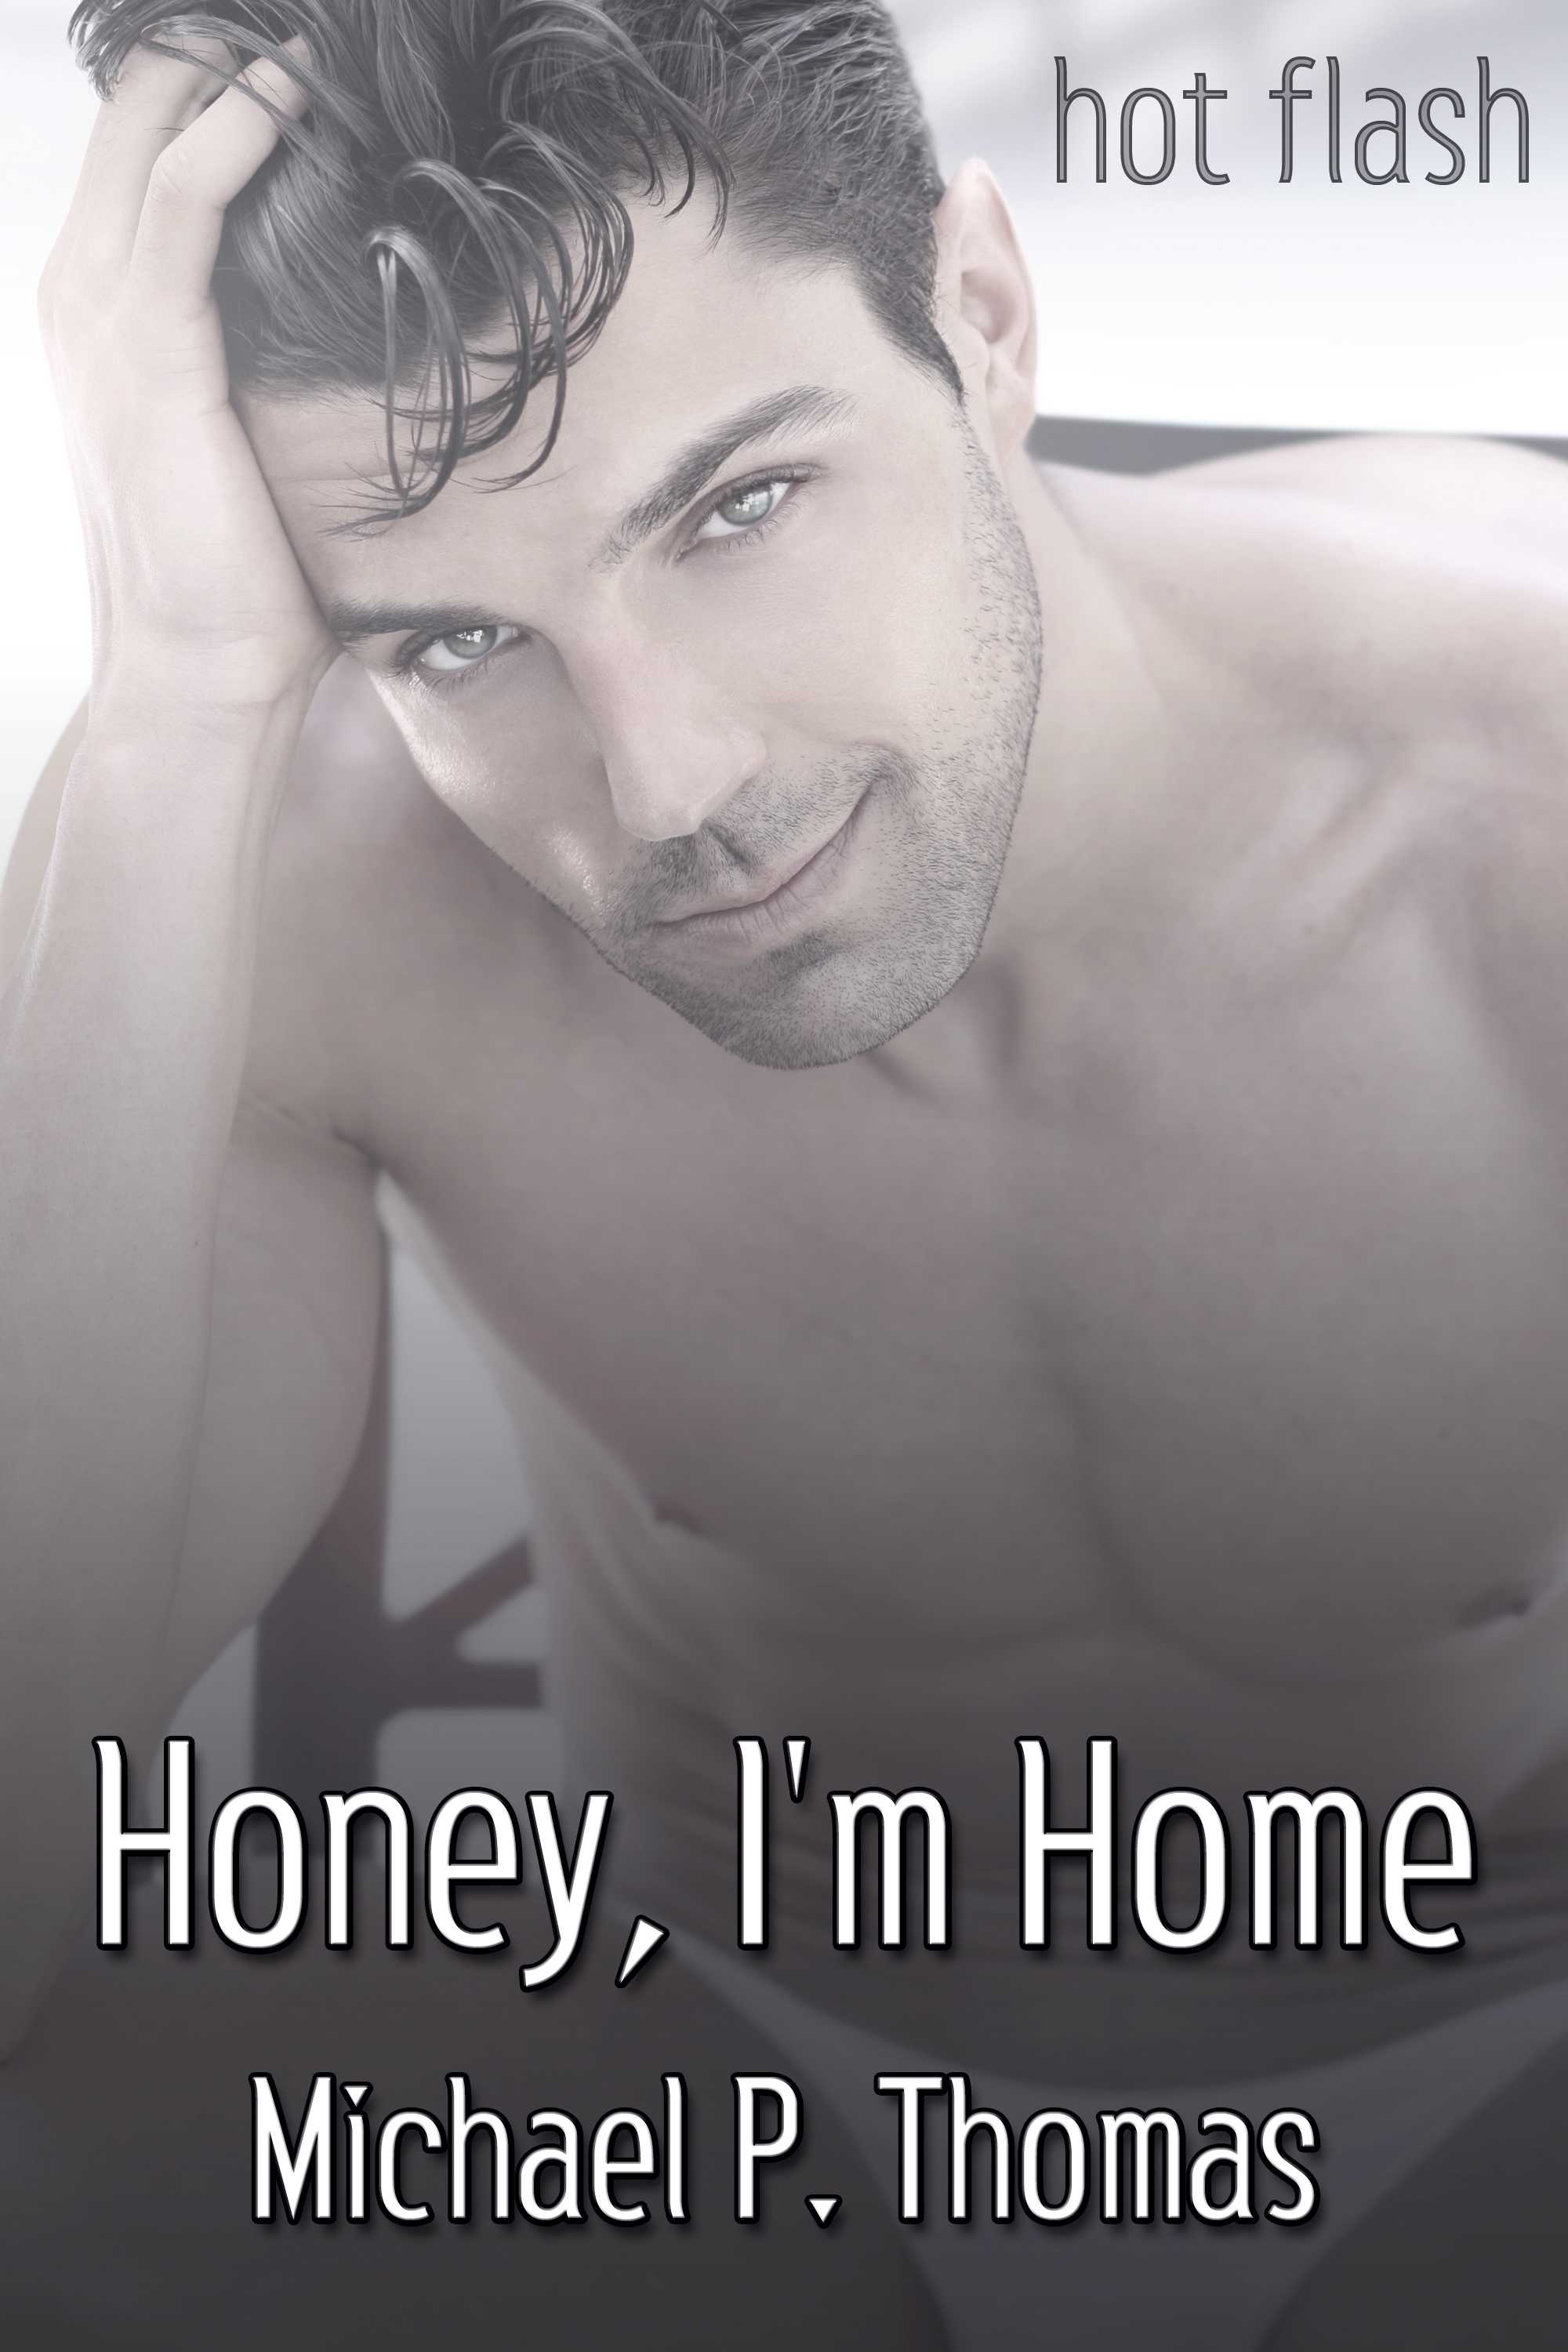 This image is the cover for the book Honey, I'm Home, Hot Flash